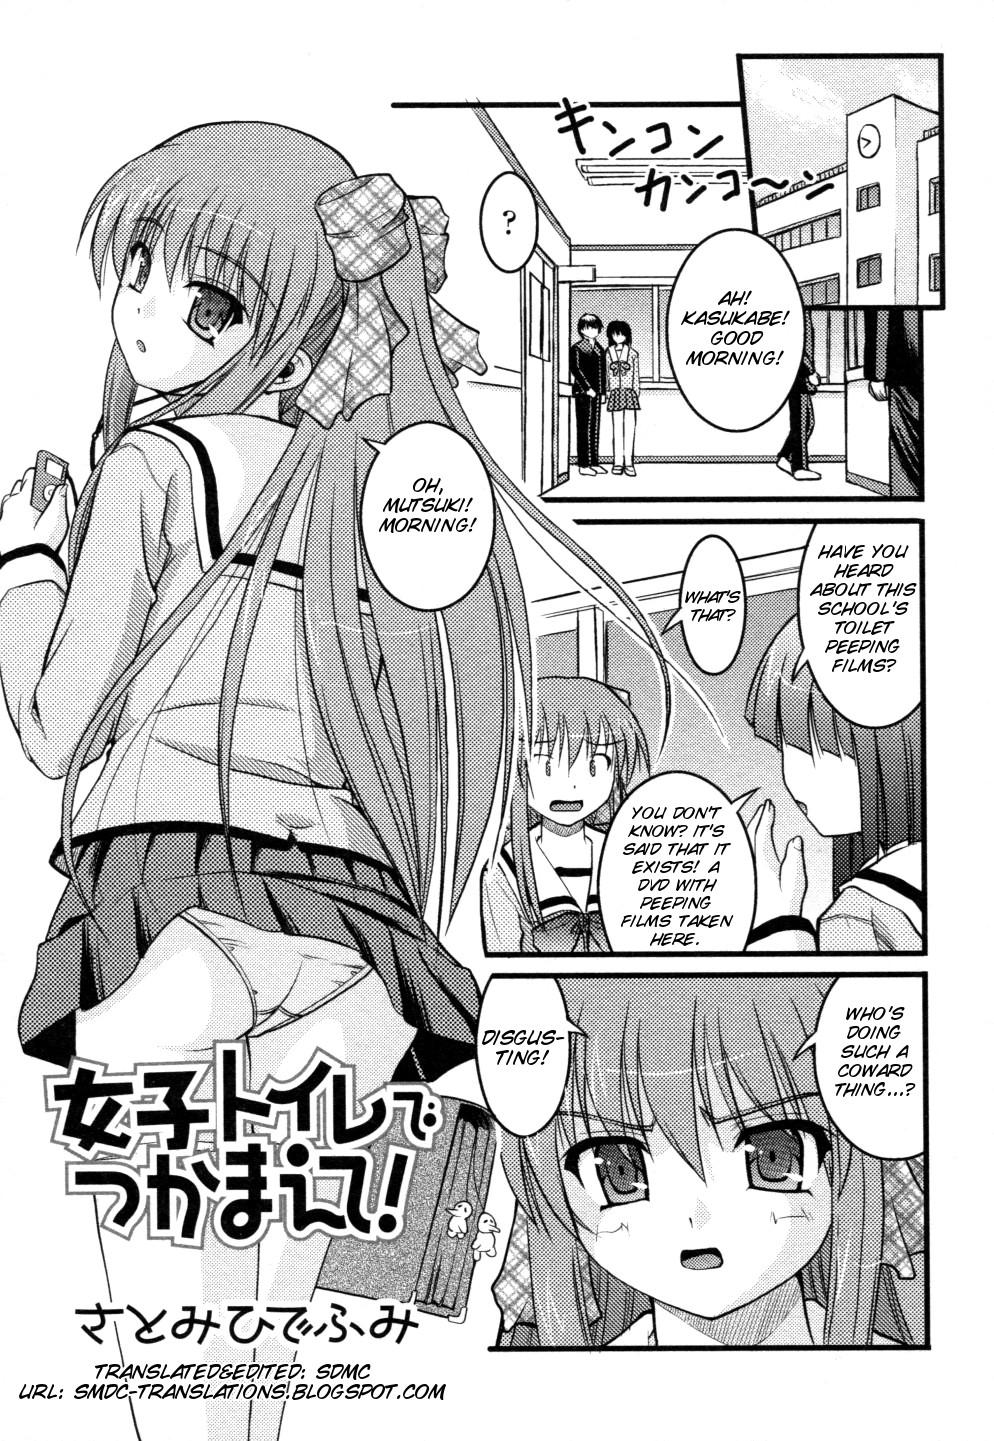 Lips [Anthology Nozoite wa Ikenai 3](do not peep 3) ep4 [Satomi Hidefumi] - The Catcher in The Girl's Room(Eng) Clip - Page 3